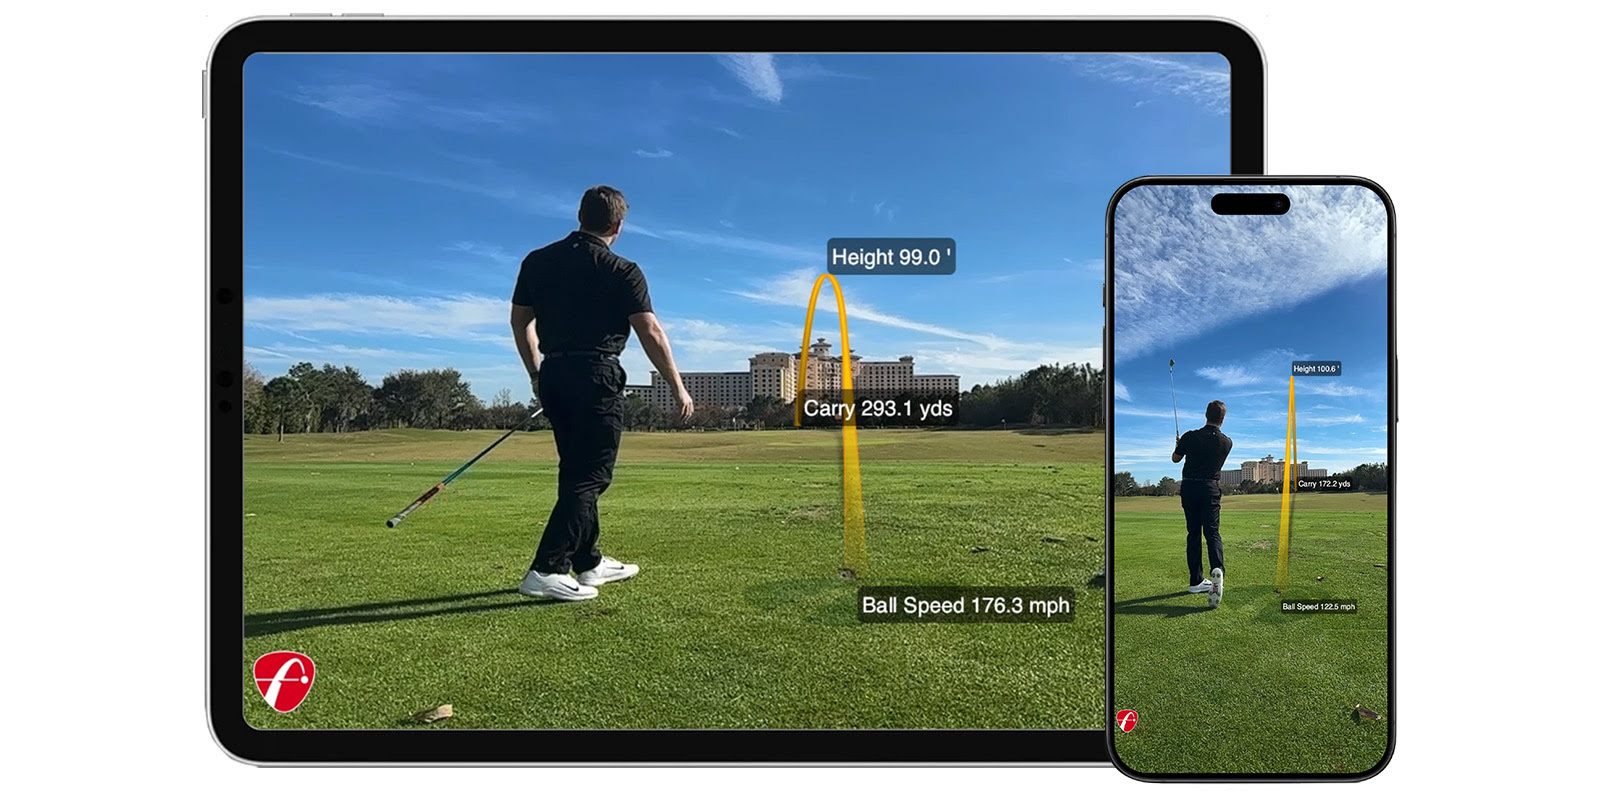 FlightScope Announces the Release of its New Tracer Feature